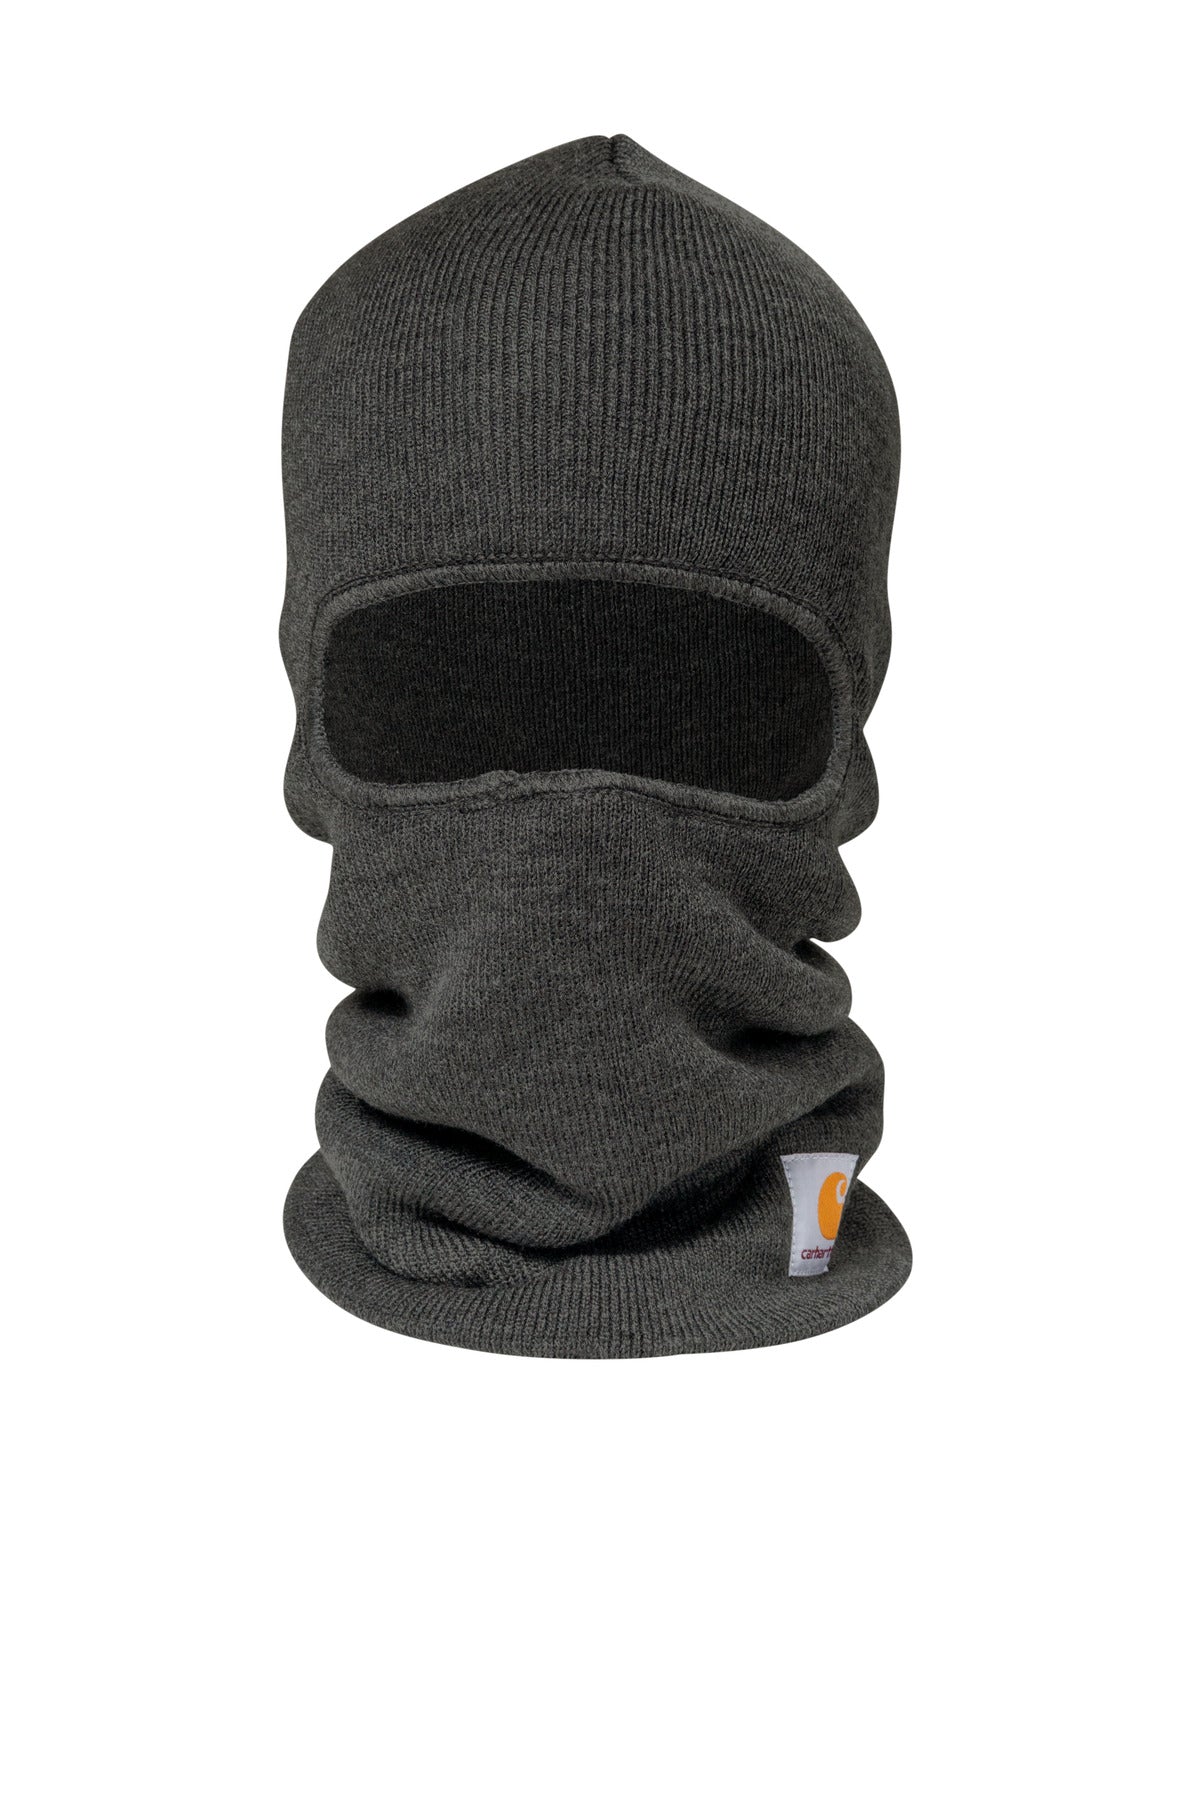 Carhartt® Knit Insulated Face Mask CT104485